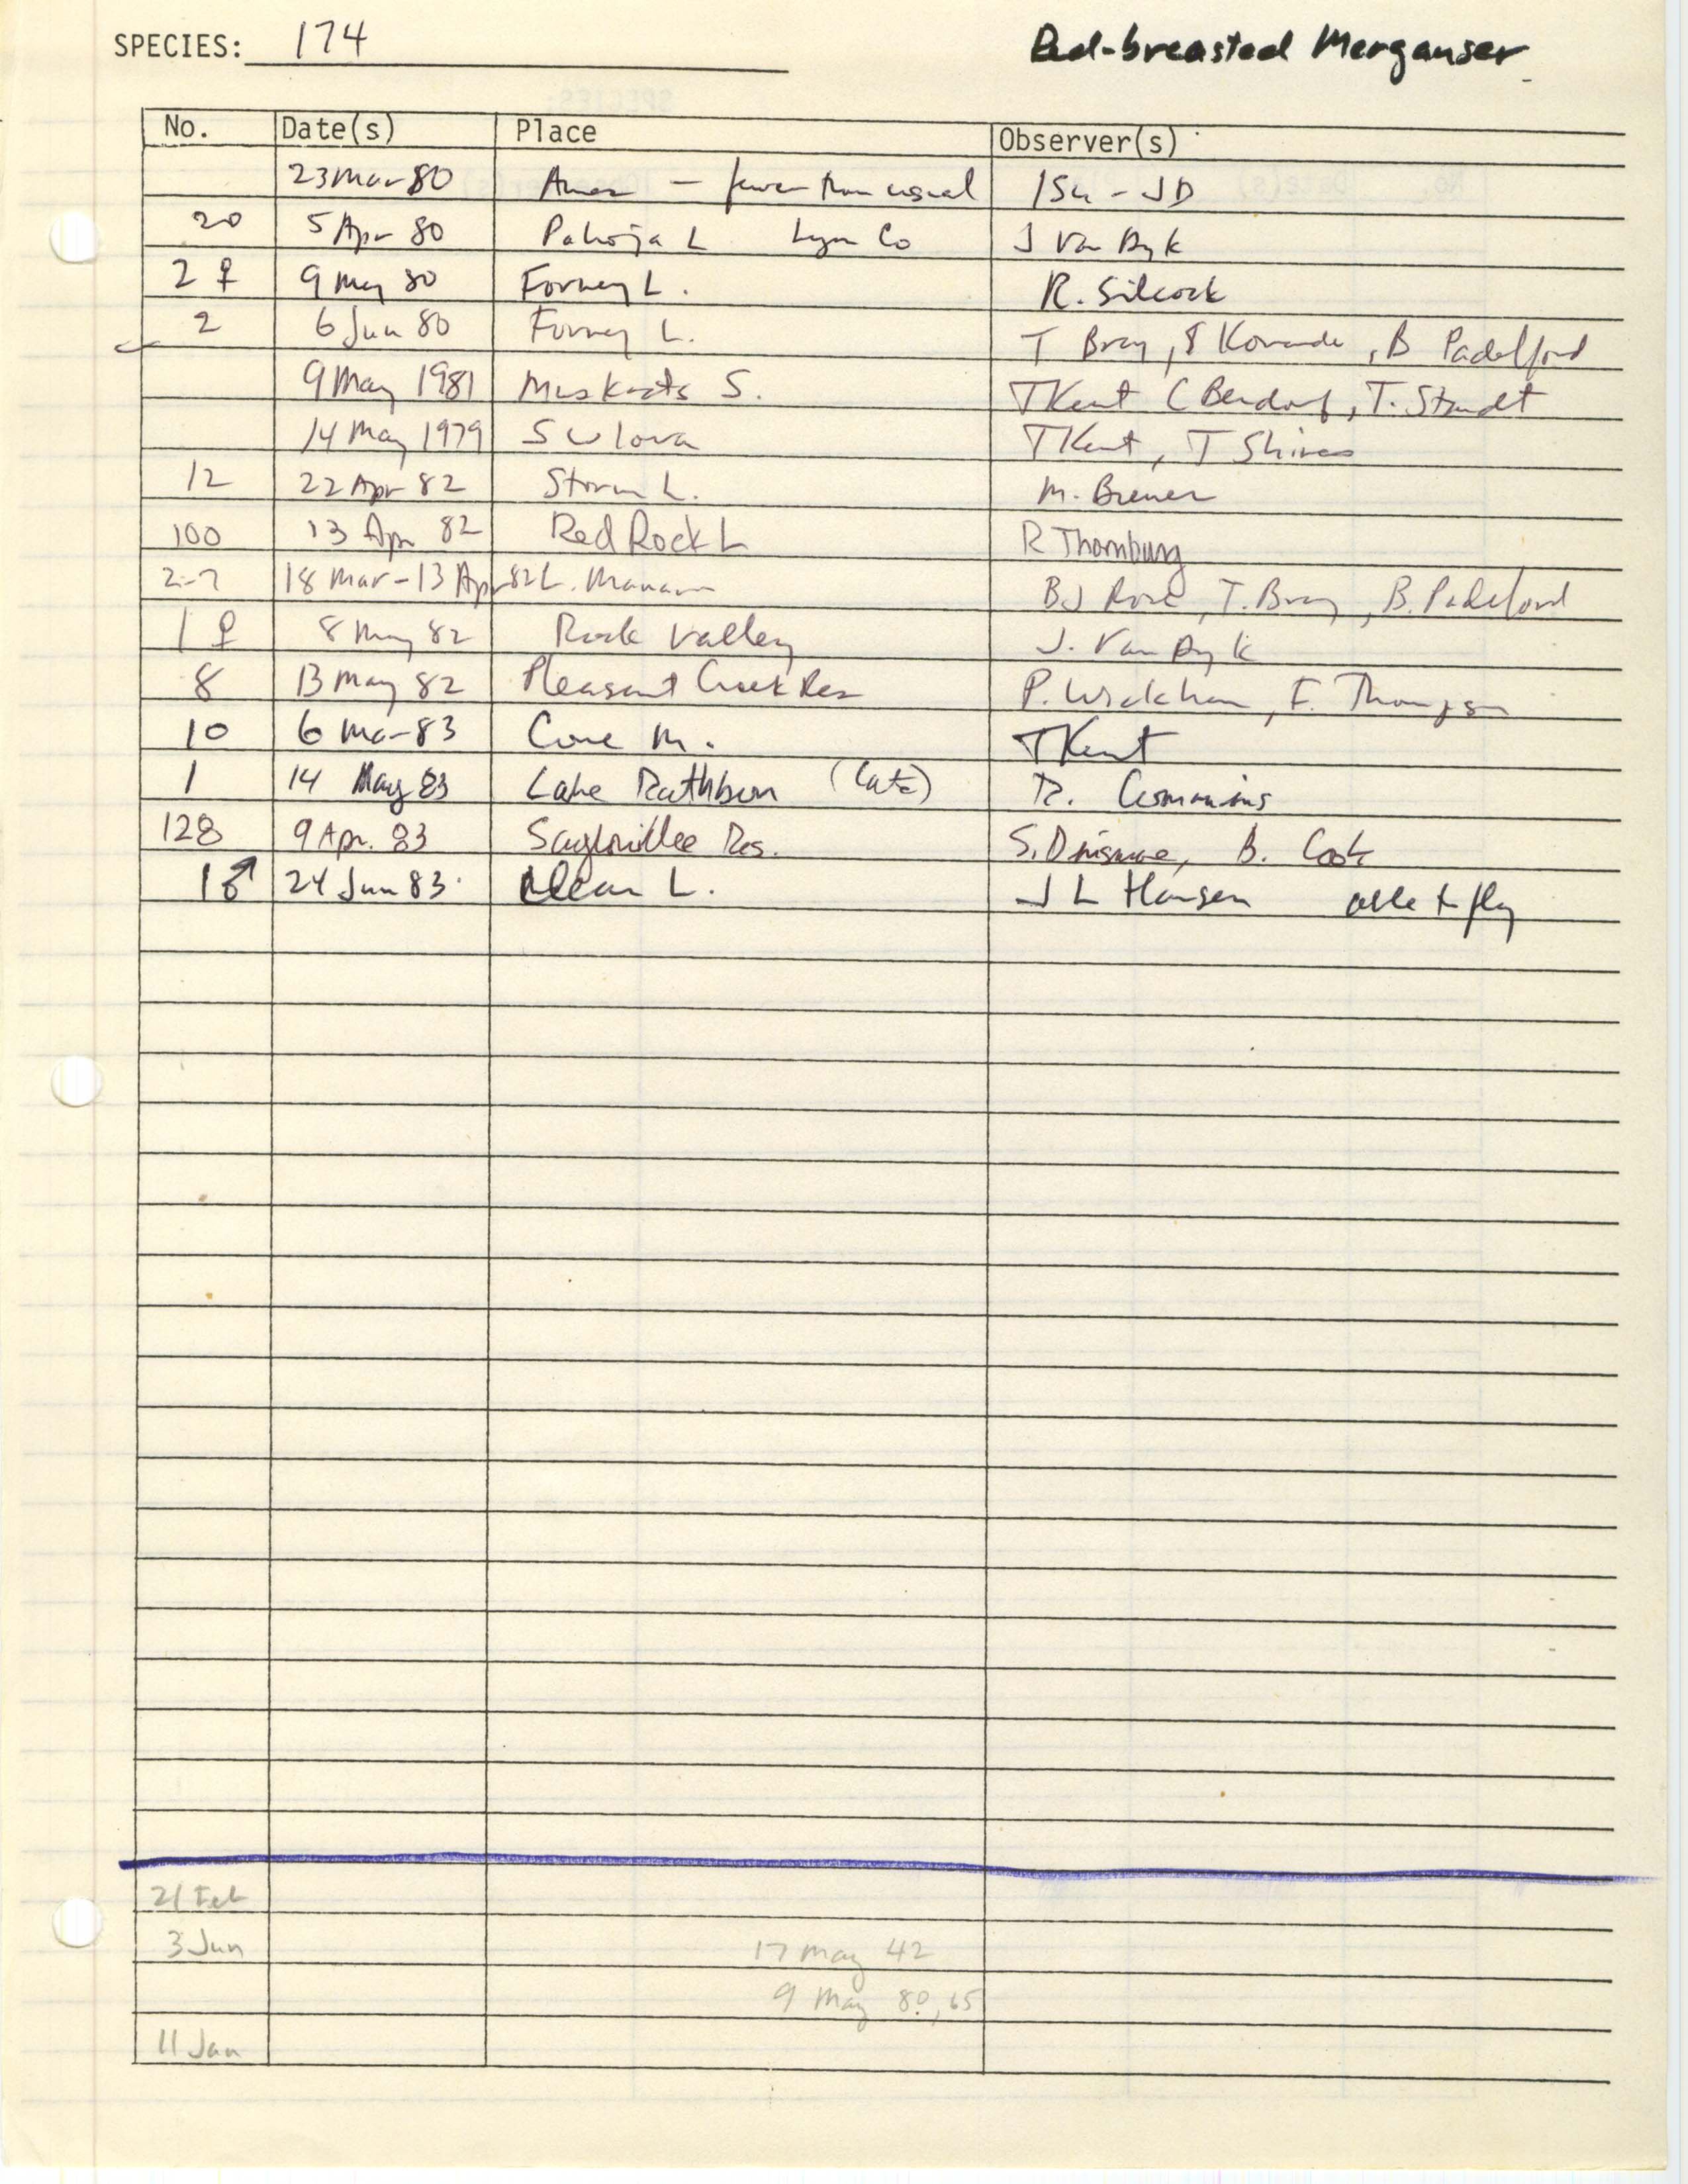 Iowa Ornithologists' Union, field report compiled data, Red-breasted Merganser, 1942-1983